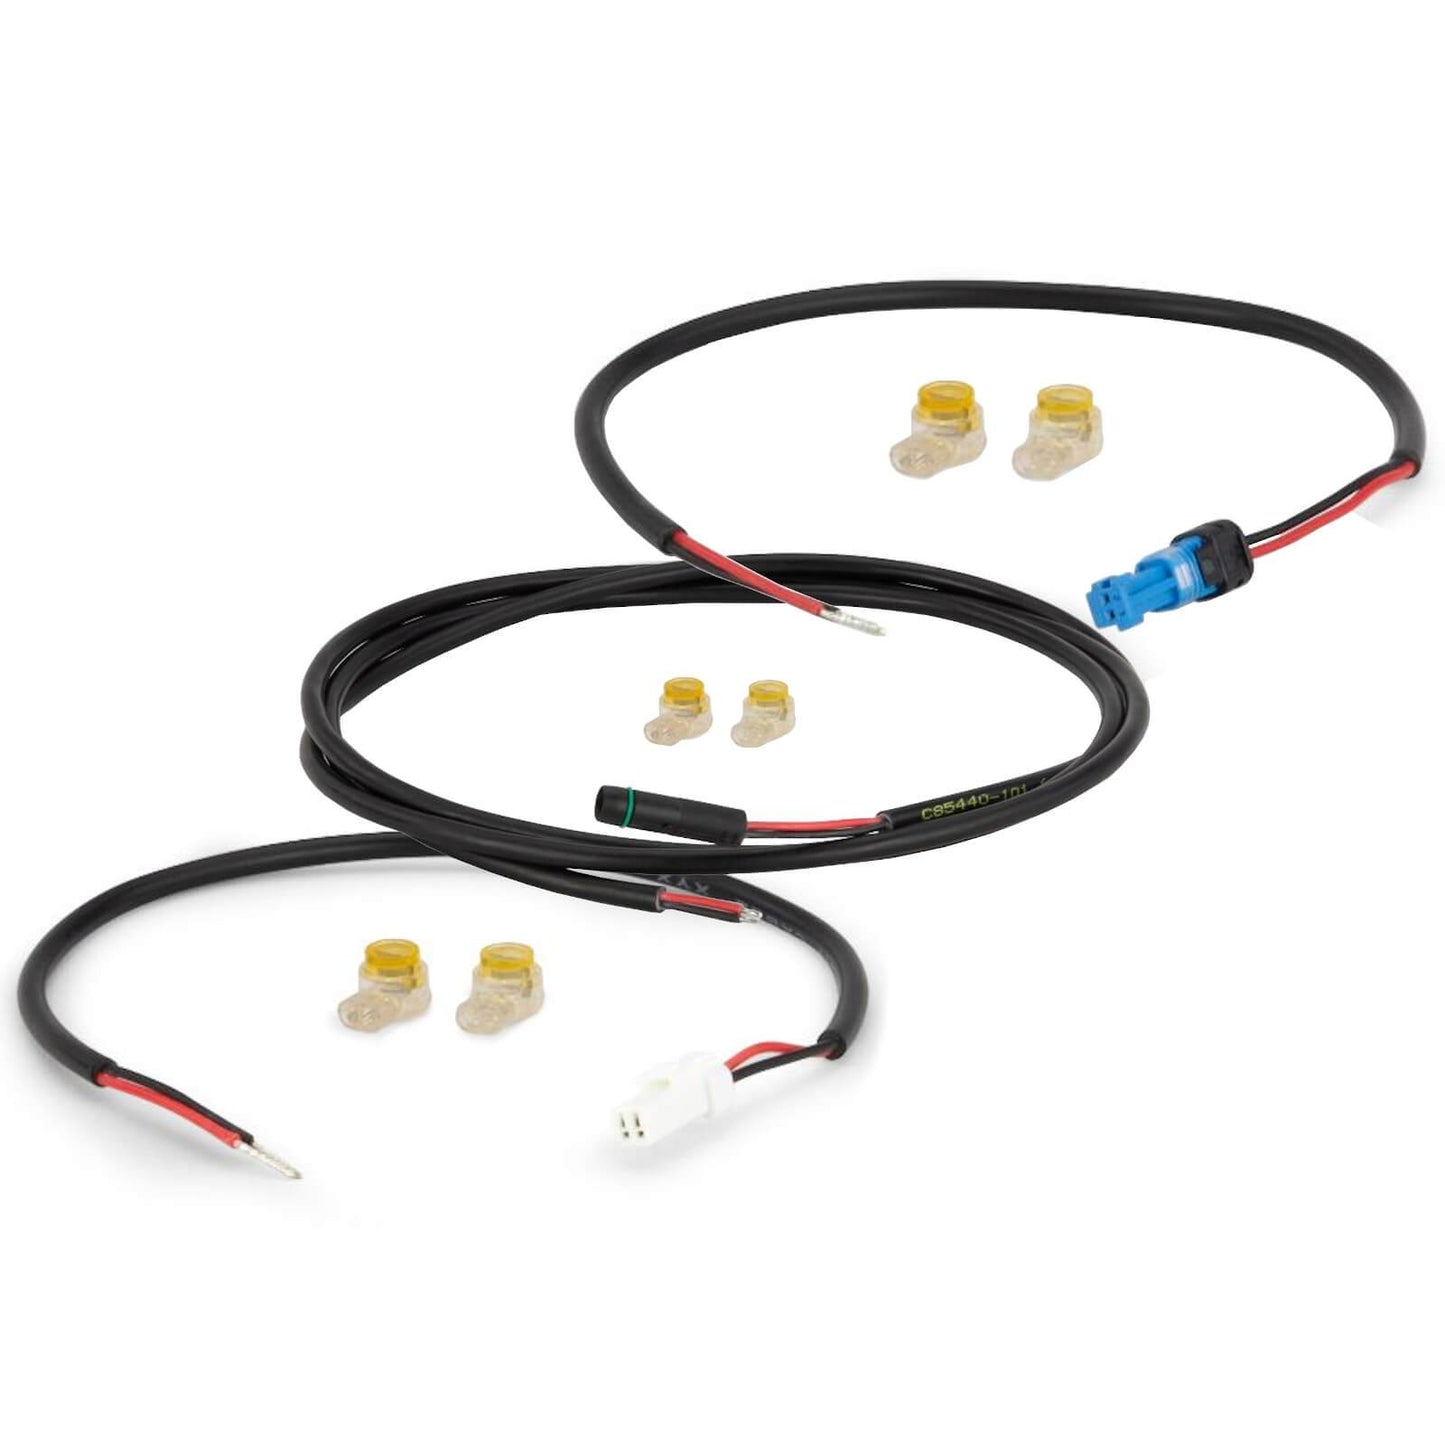 USE Exposure eBike Connection Cable For Electric Bike Lights